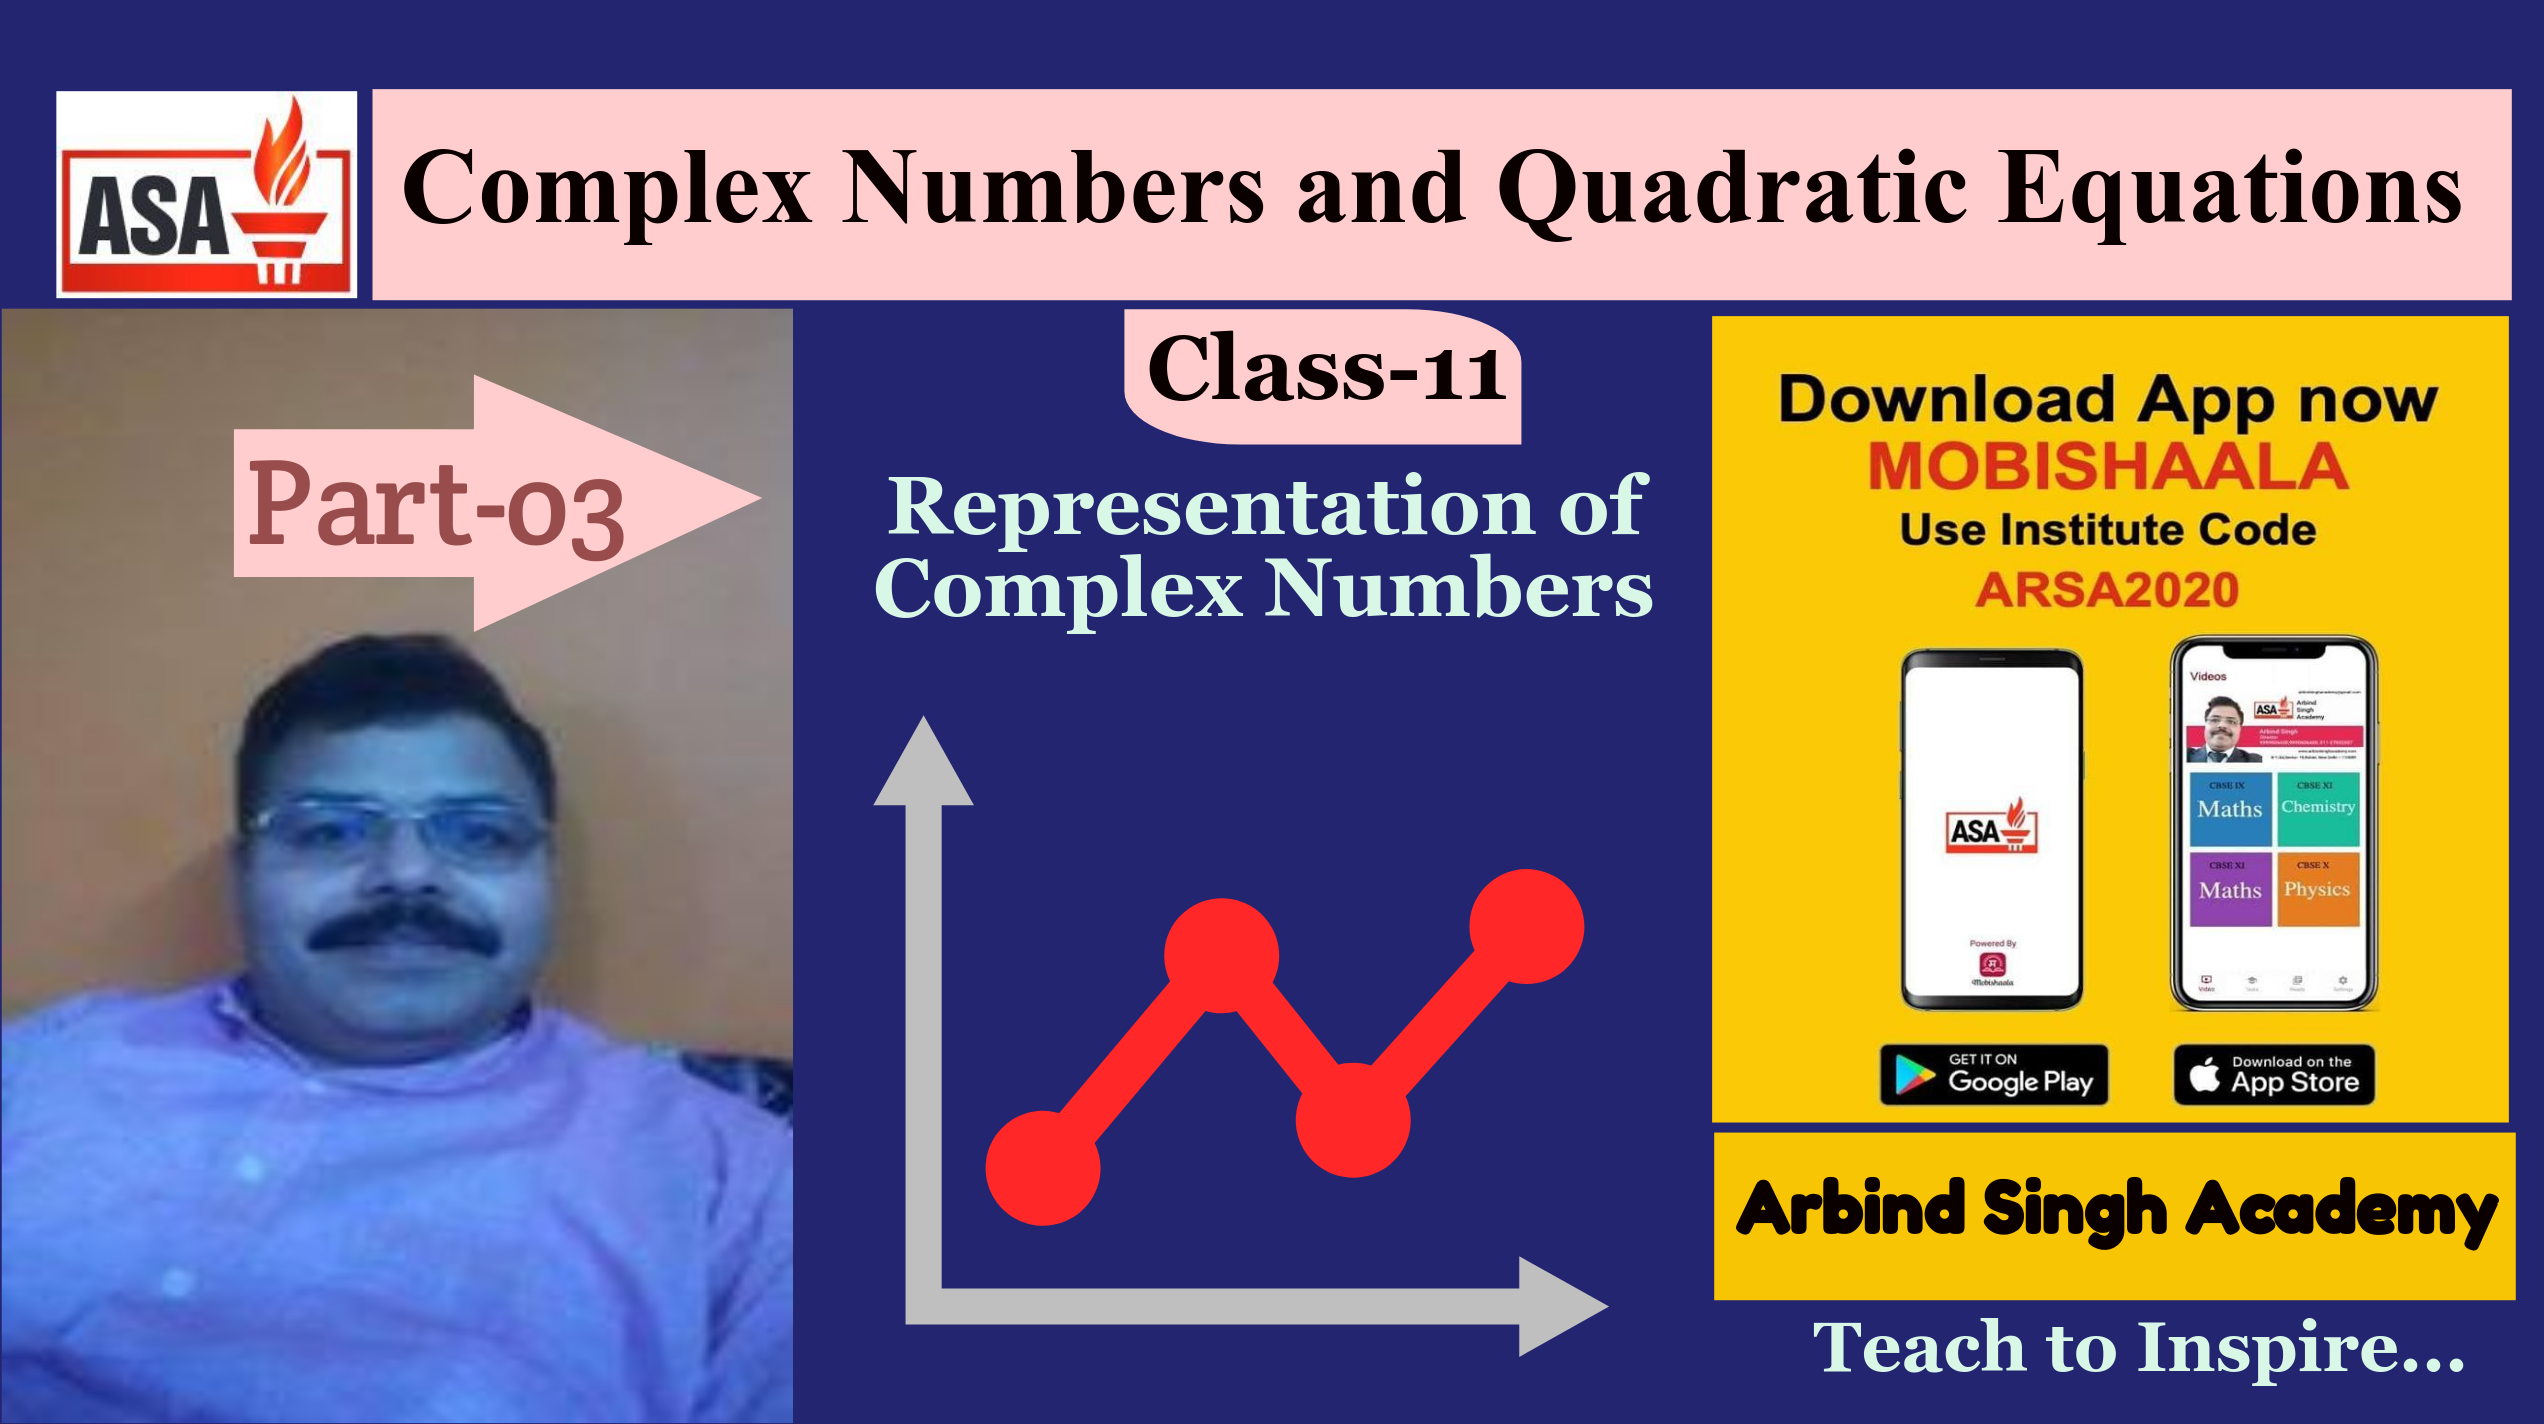 Complex Numbers and Qaudratic Equations for Class-11 : Part-03